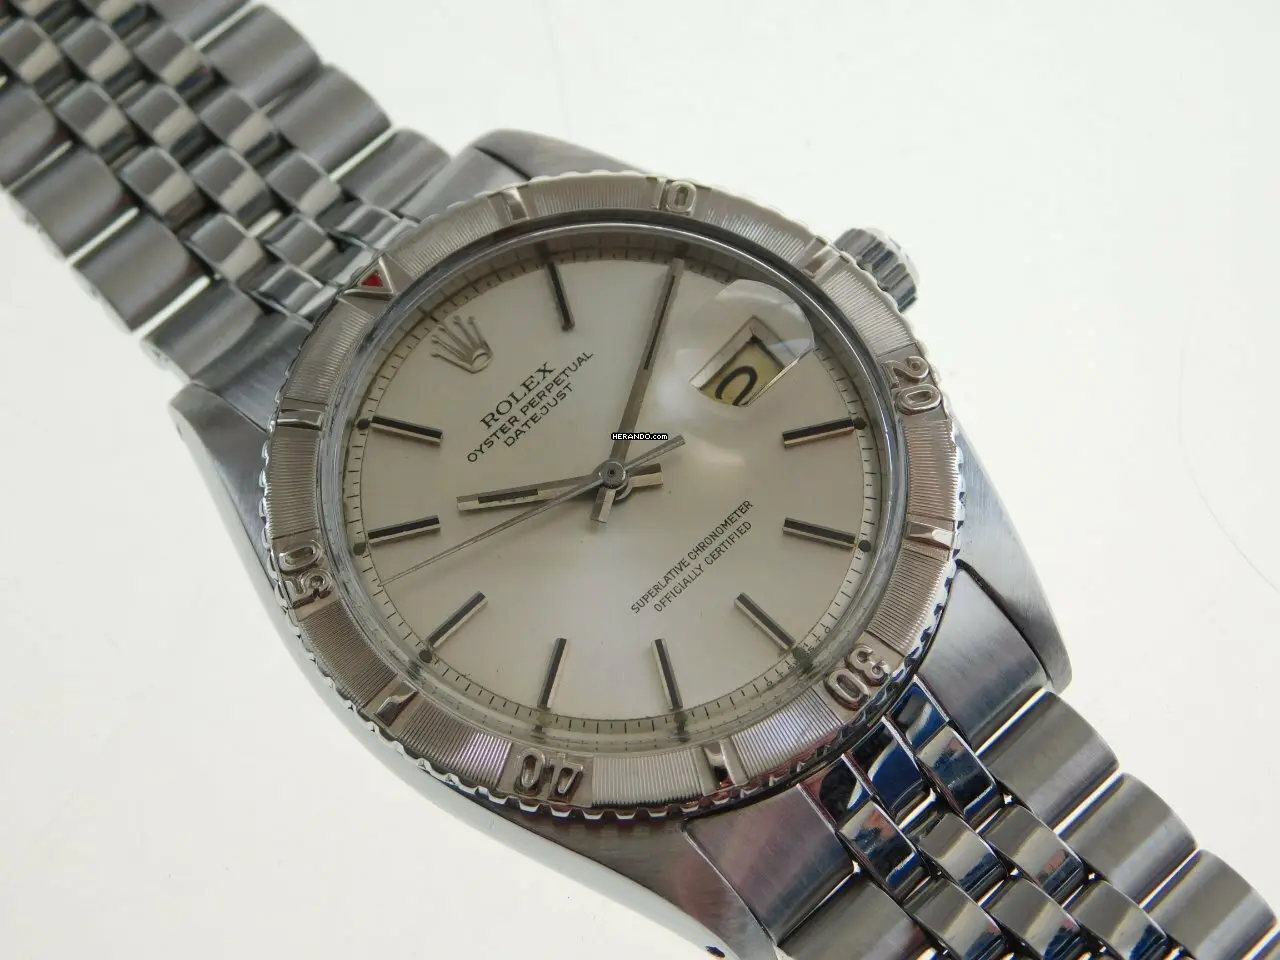 watches-328592-28436460-ukanohqp1w74h2fbuytsl1fh-ExtraLarge.webp